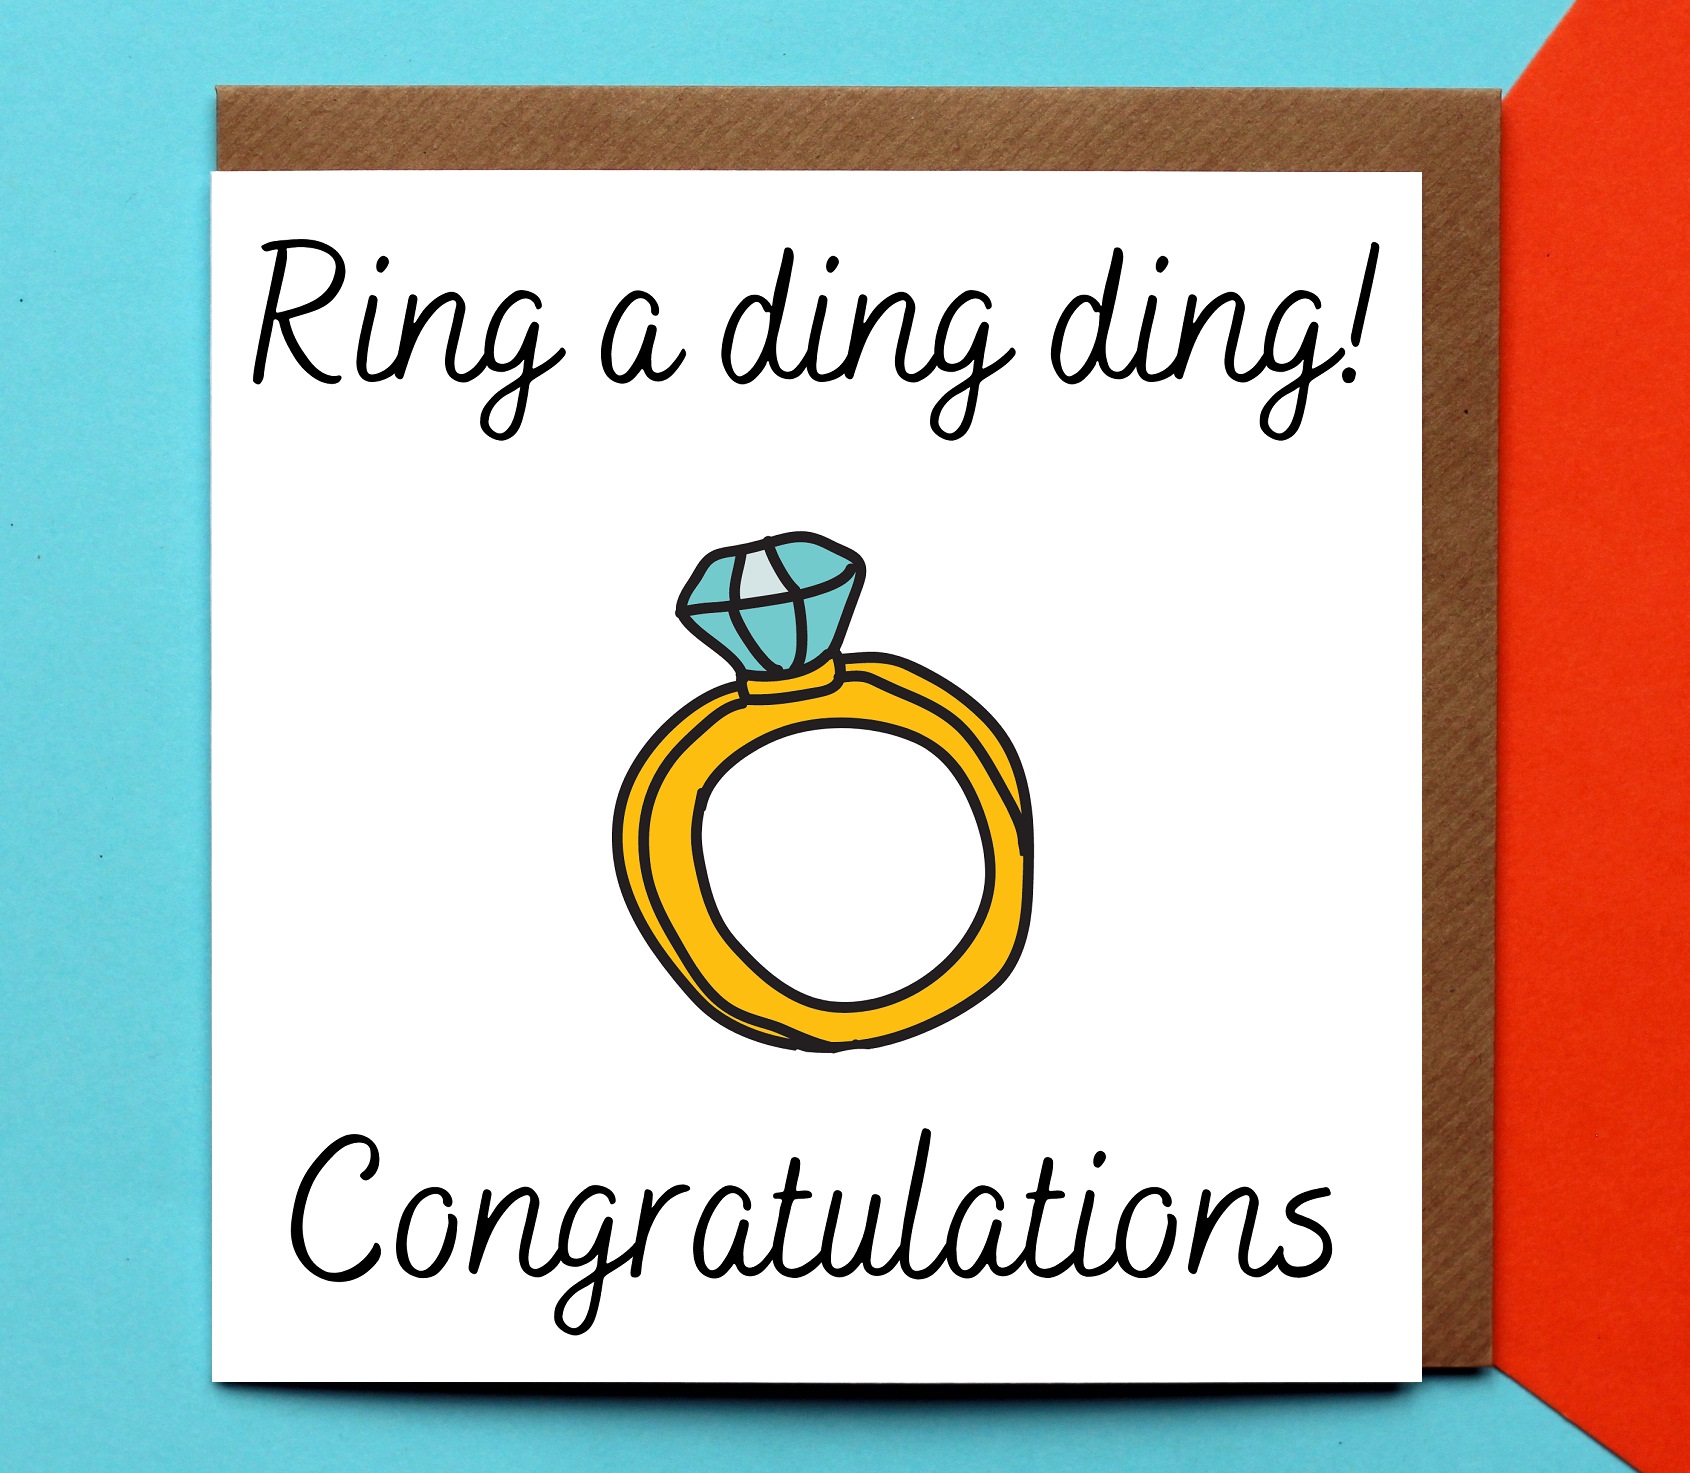 Congratulations To You Both – Fleur n Bloom